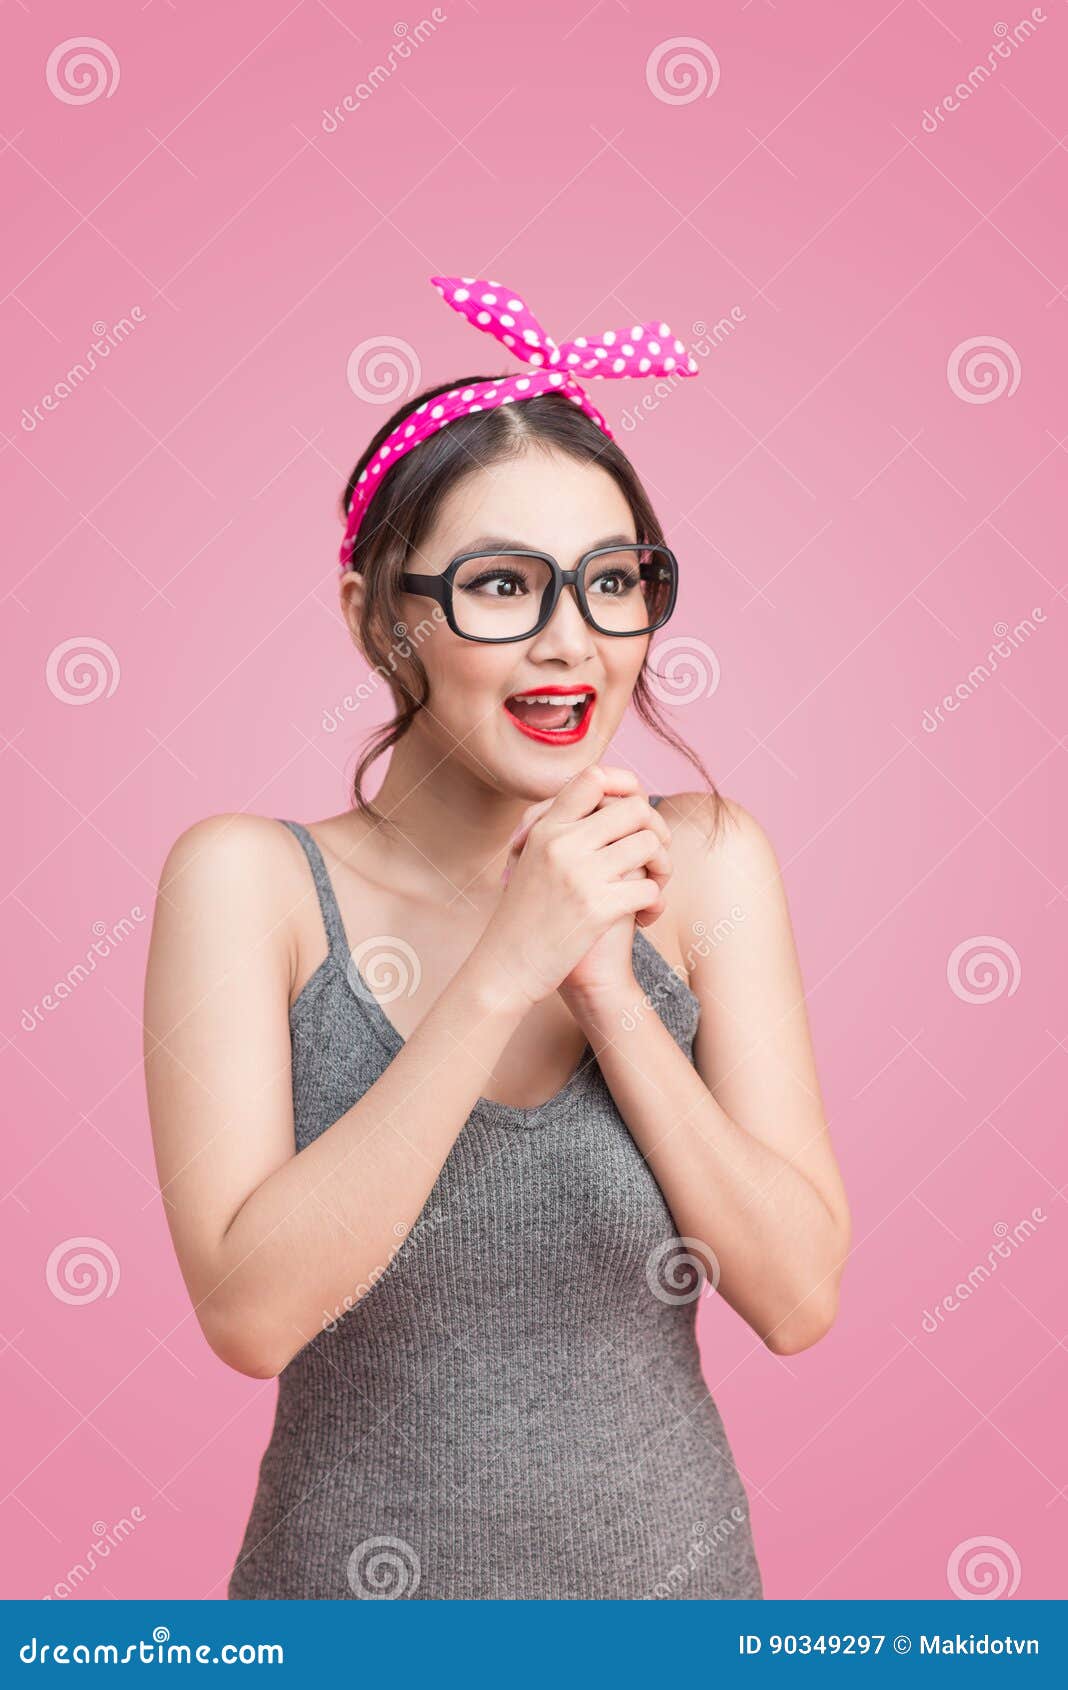 Surprised Asian Girl With Pretty Smile In Pinup Makeup Style Stock Image Image Of Asia Funny